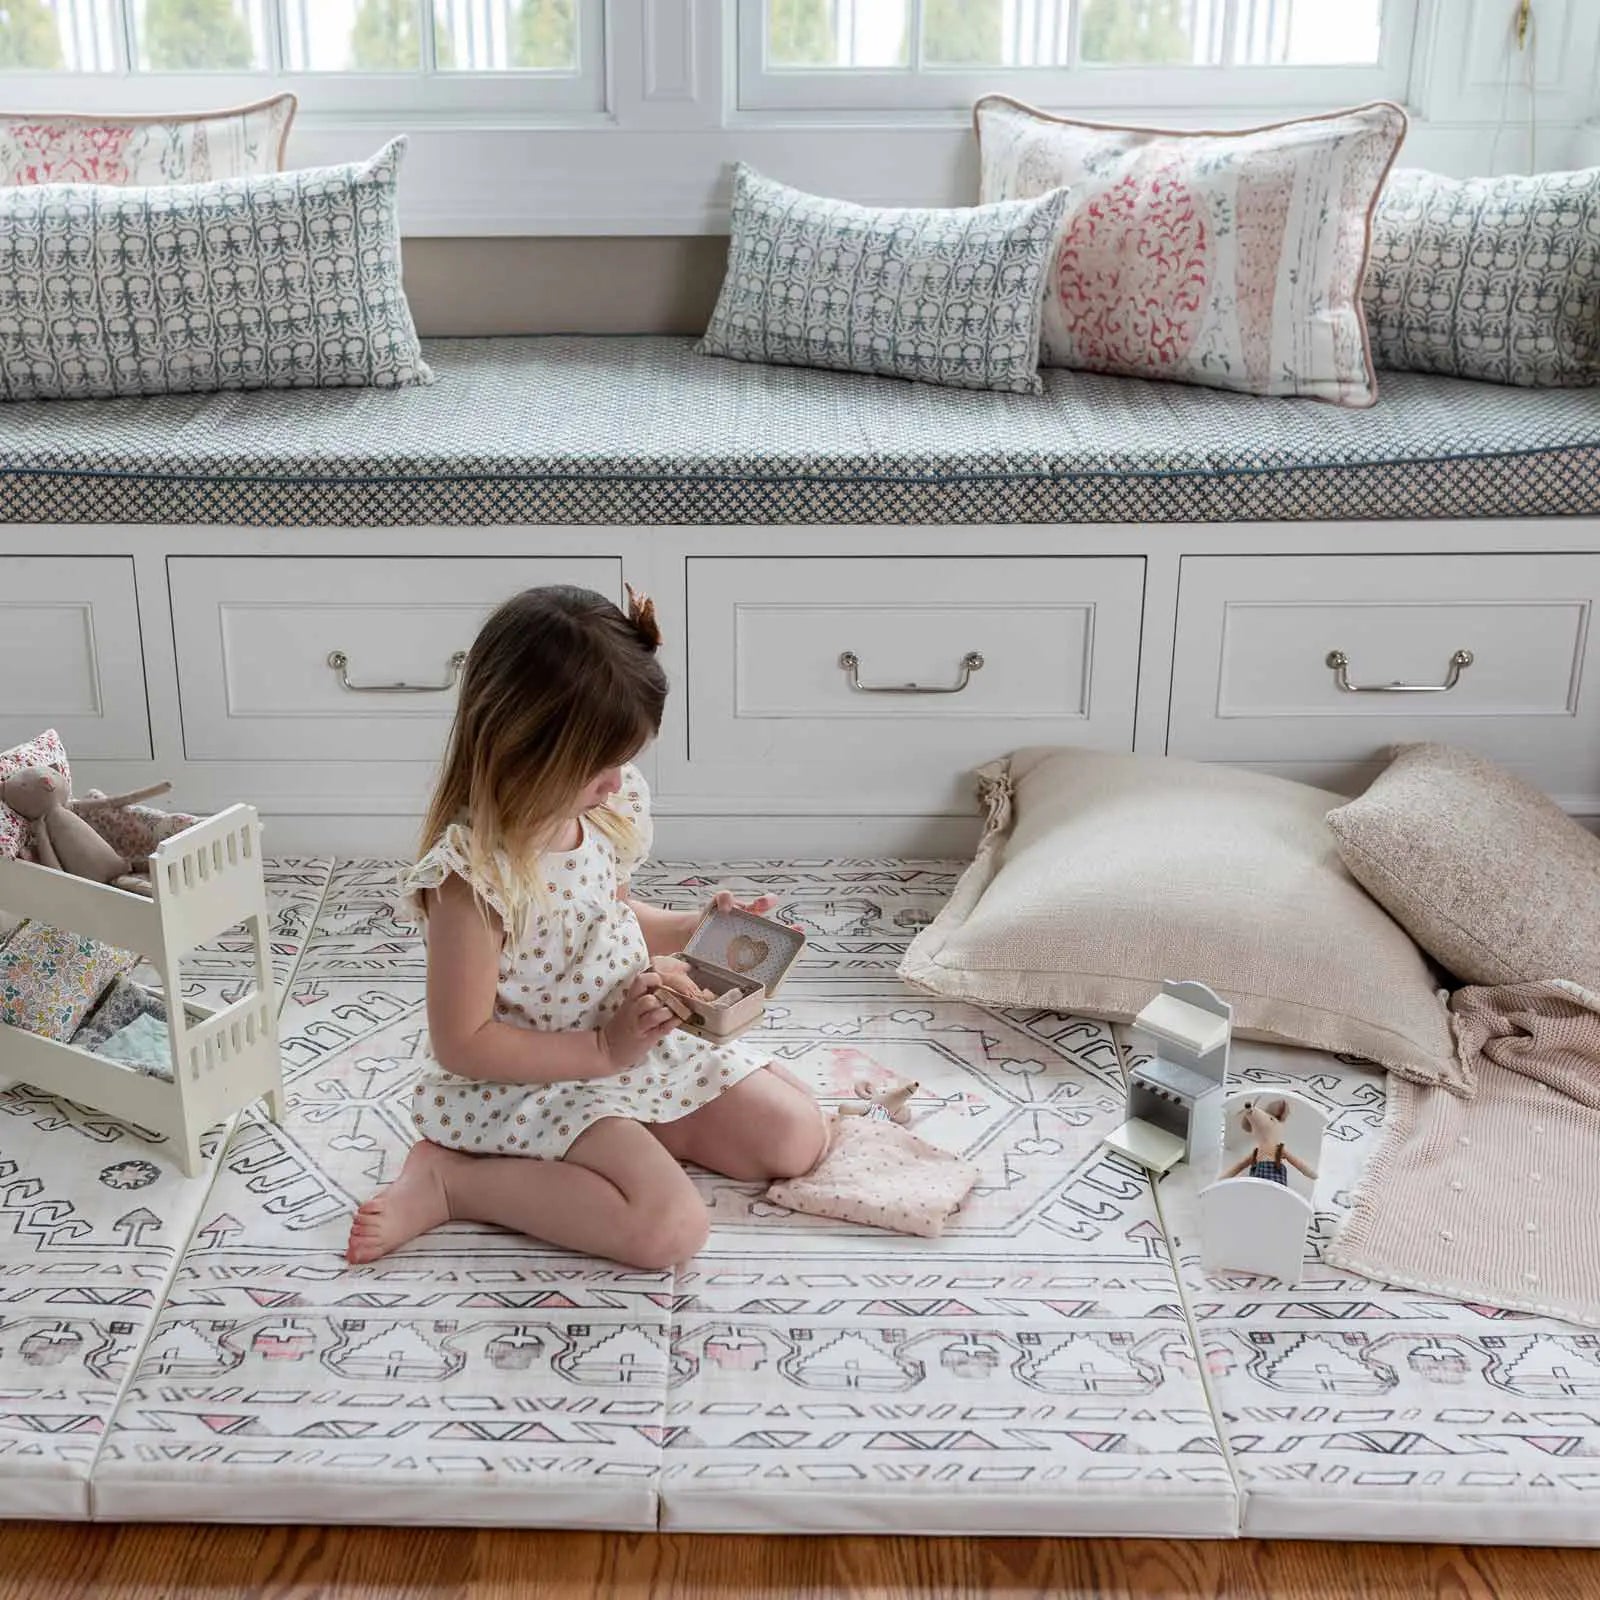 Aryla Shifting Sands cream and pink boho tumbling mat shown in front of the window seat with little girl sitting with pillow and her toys playing